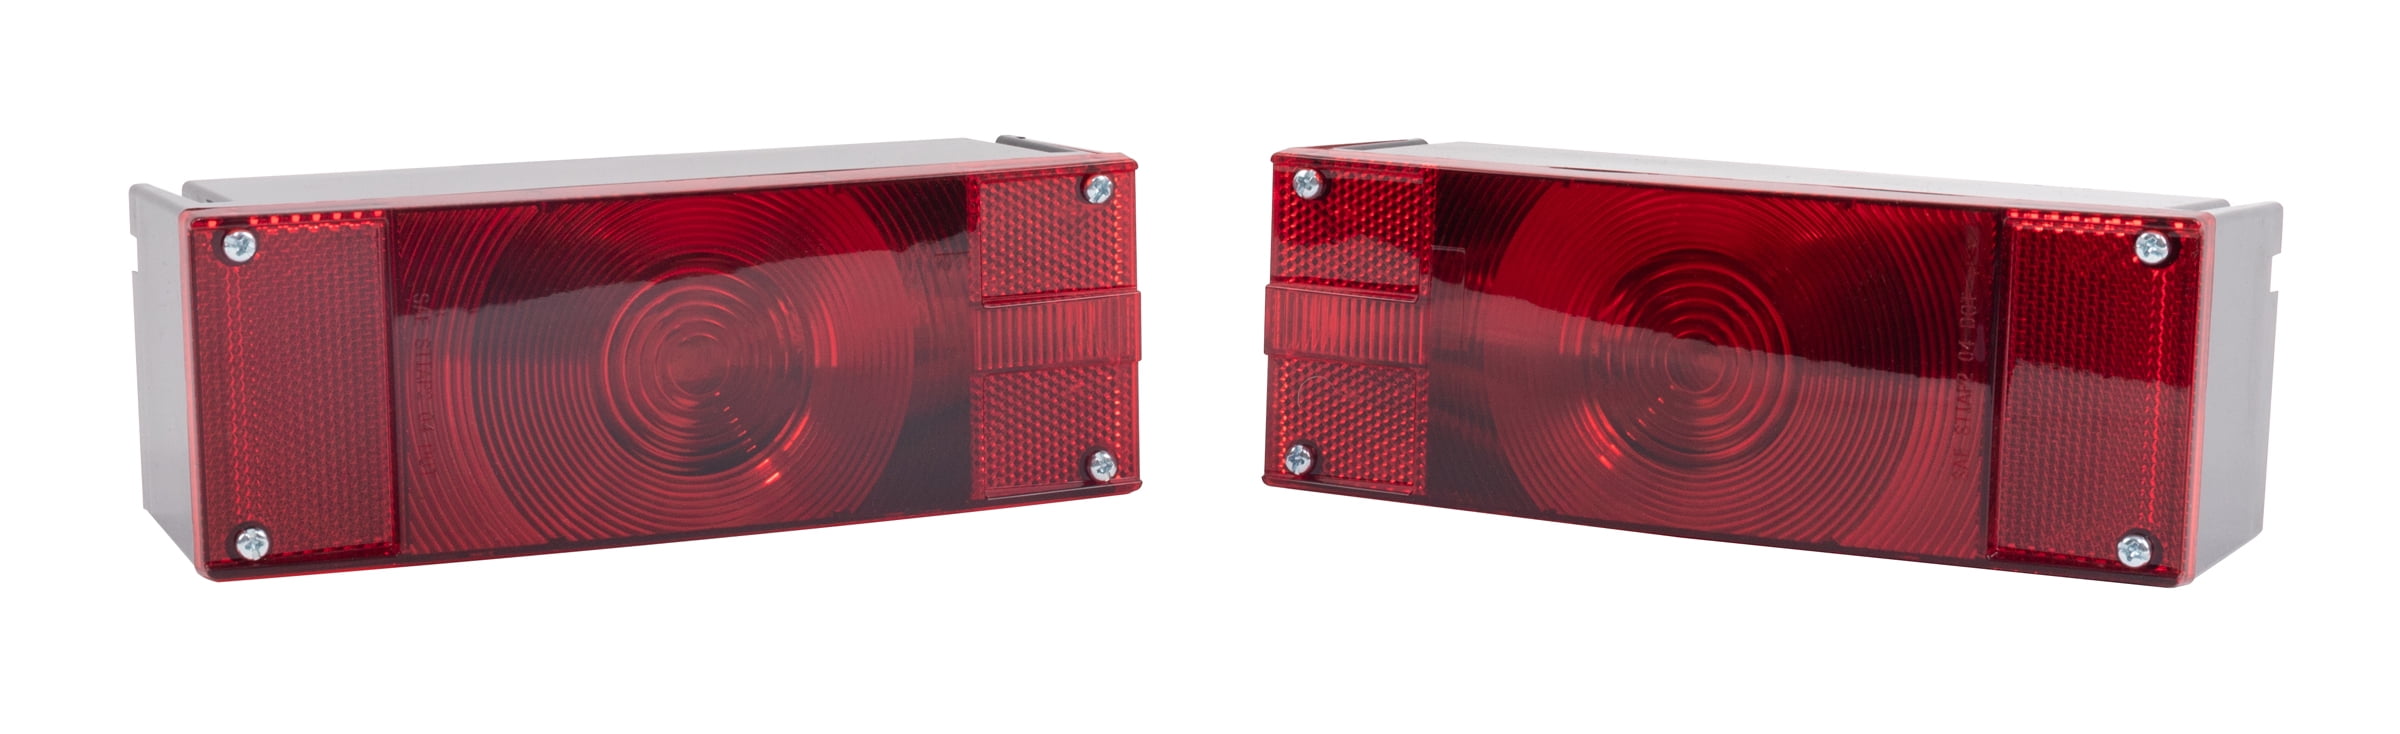 Hopkins Towing Solutions Submersible Low Profile Trailer Light Kit, C6285,  Red 